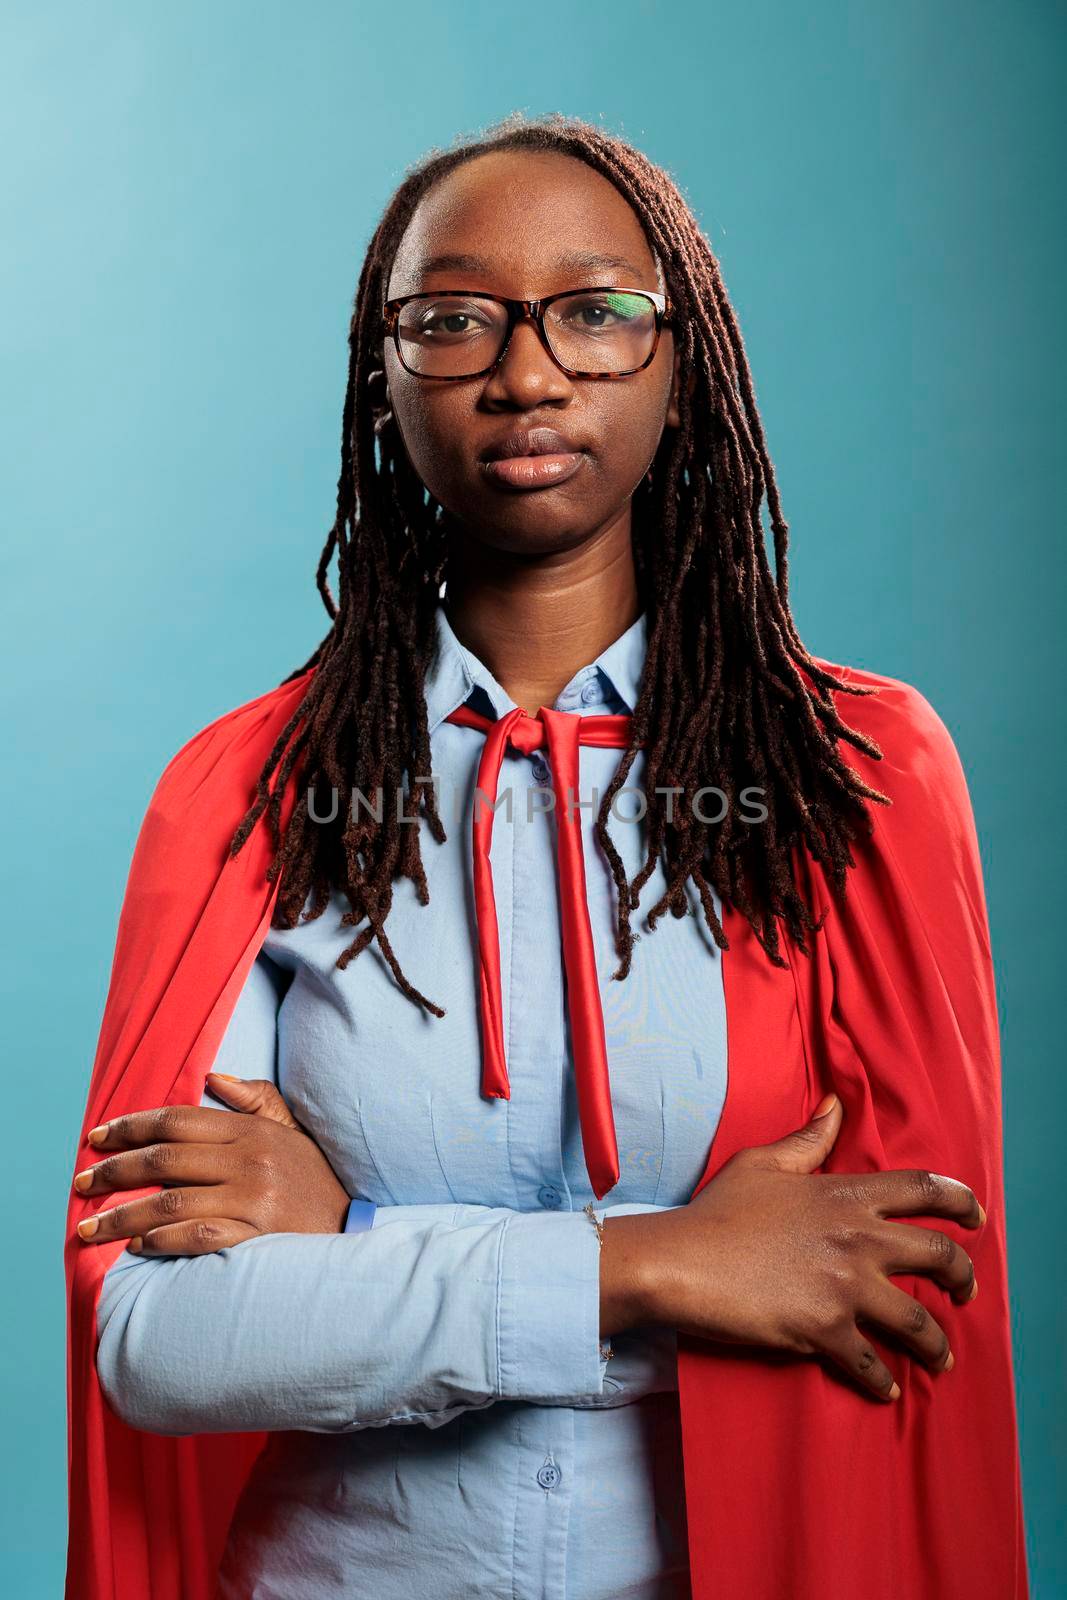 Mighty justice defender woman wearing superhero red cape standing with arms crossed while looking at camera. Young adult hero looking tough on blue background. Studio shot.